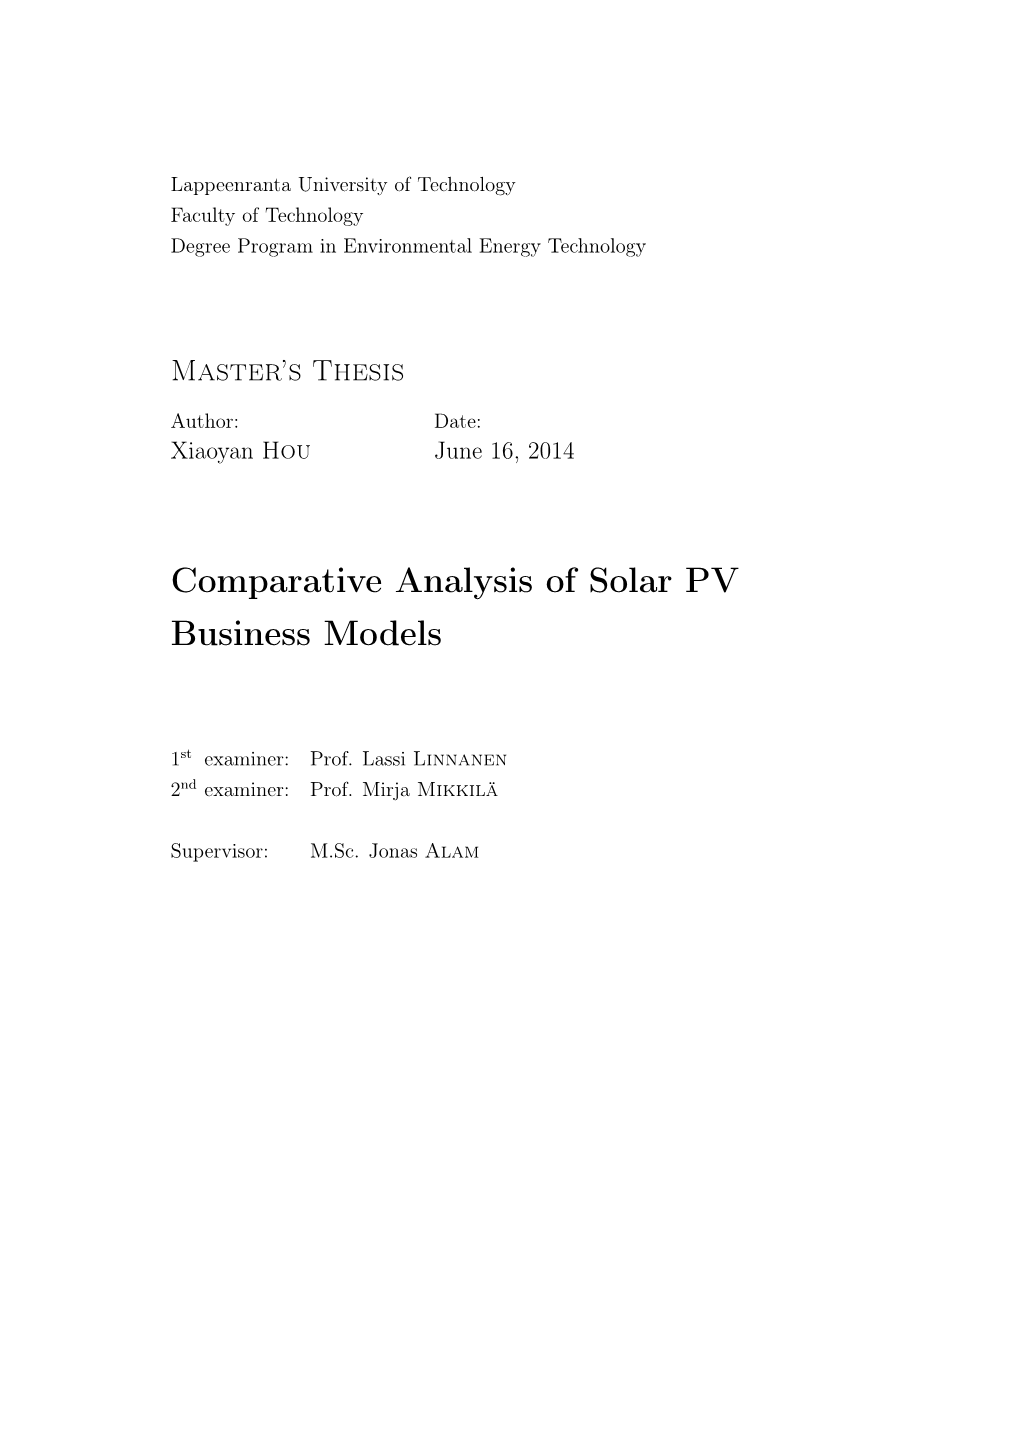 Comparative Analysis of Solar PV Business Models